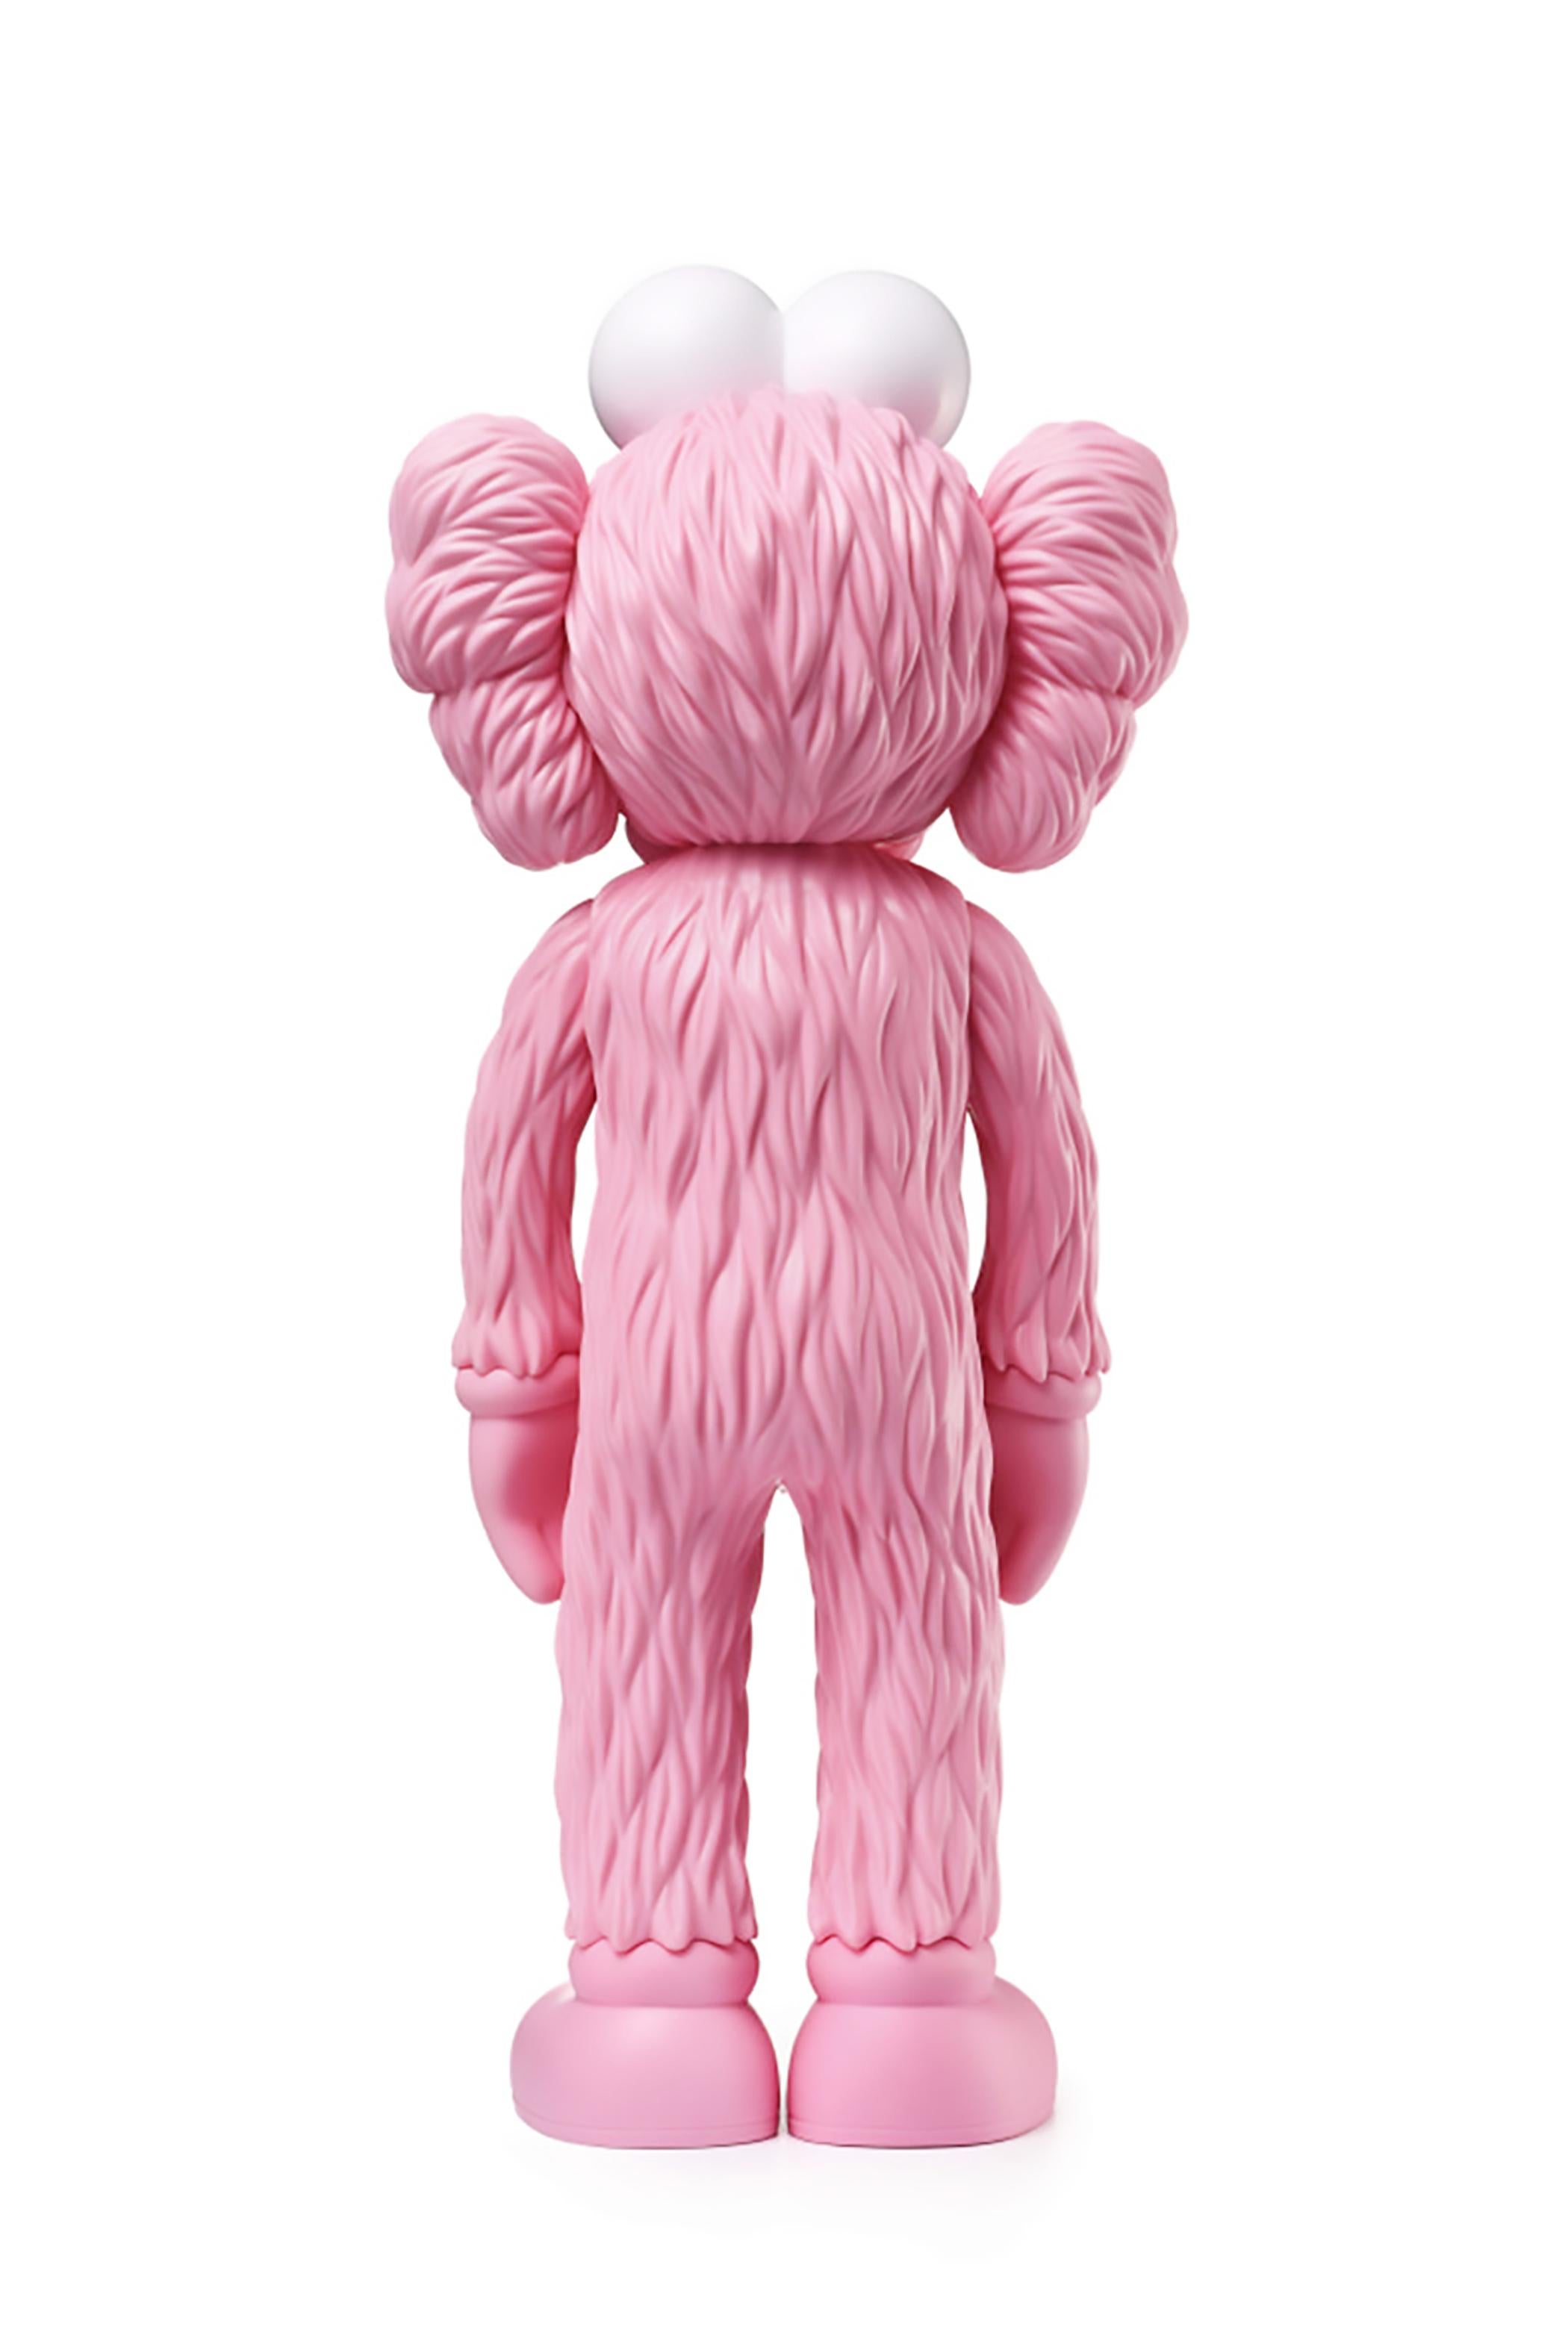 Rare KAWS BFF Pink new, unopened in its original packaging. 
A well-received work and variation of KAWS’ large scale BFF sculpture is in Los Angeles's Playa Vista neighborhood Completely sold out; highly collectible and rarer in this color.